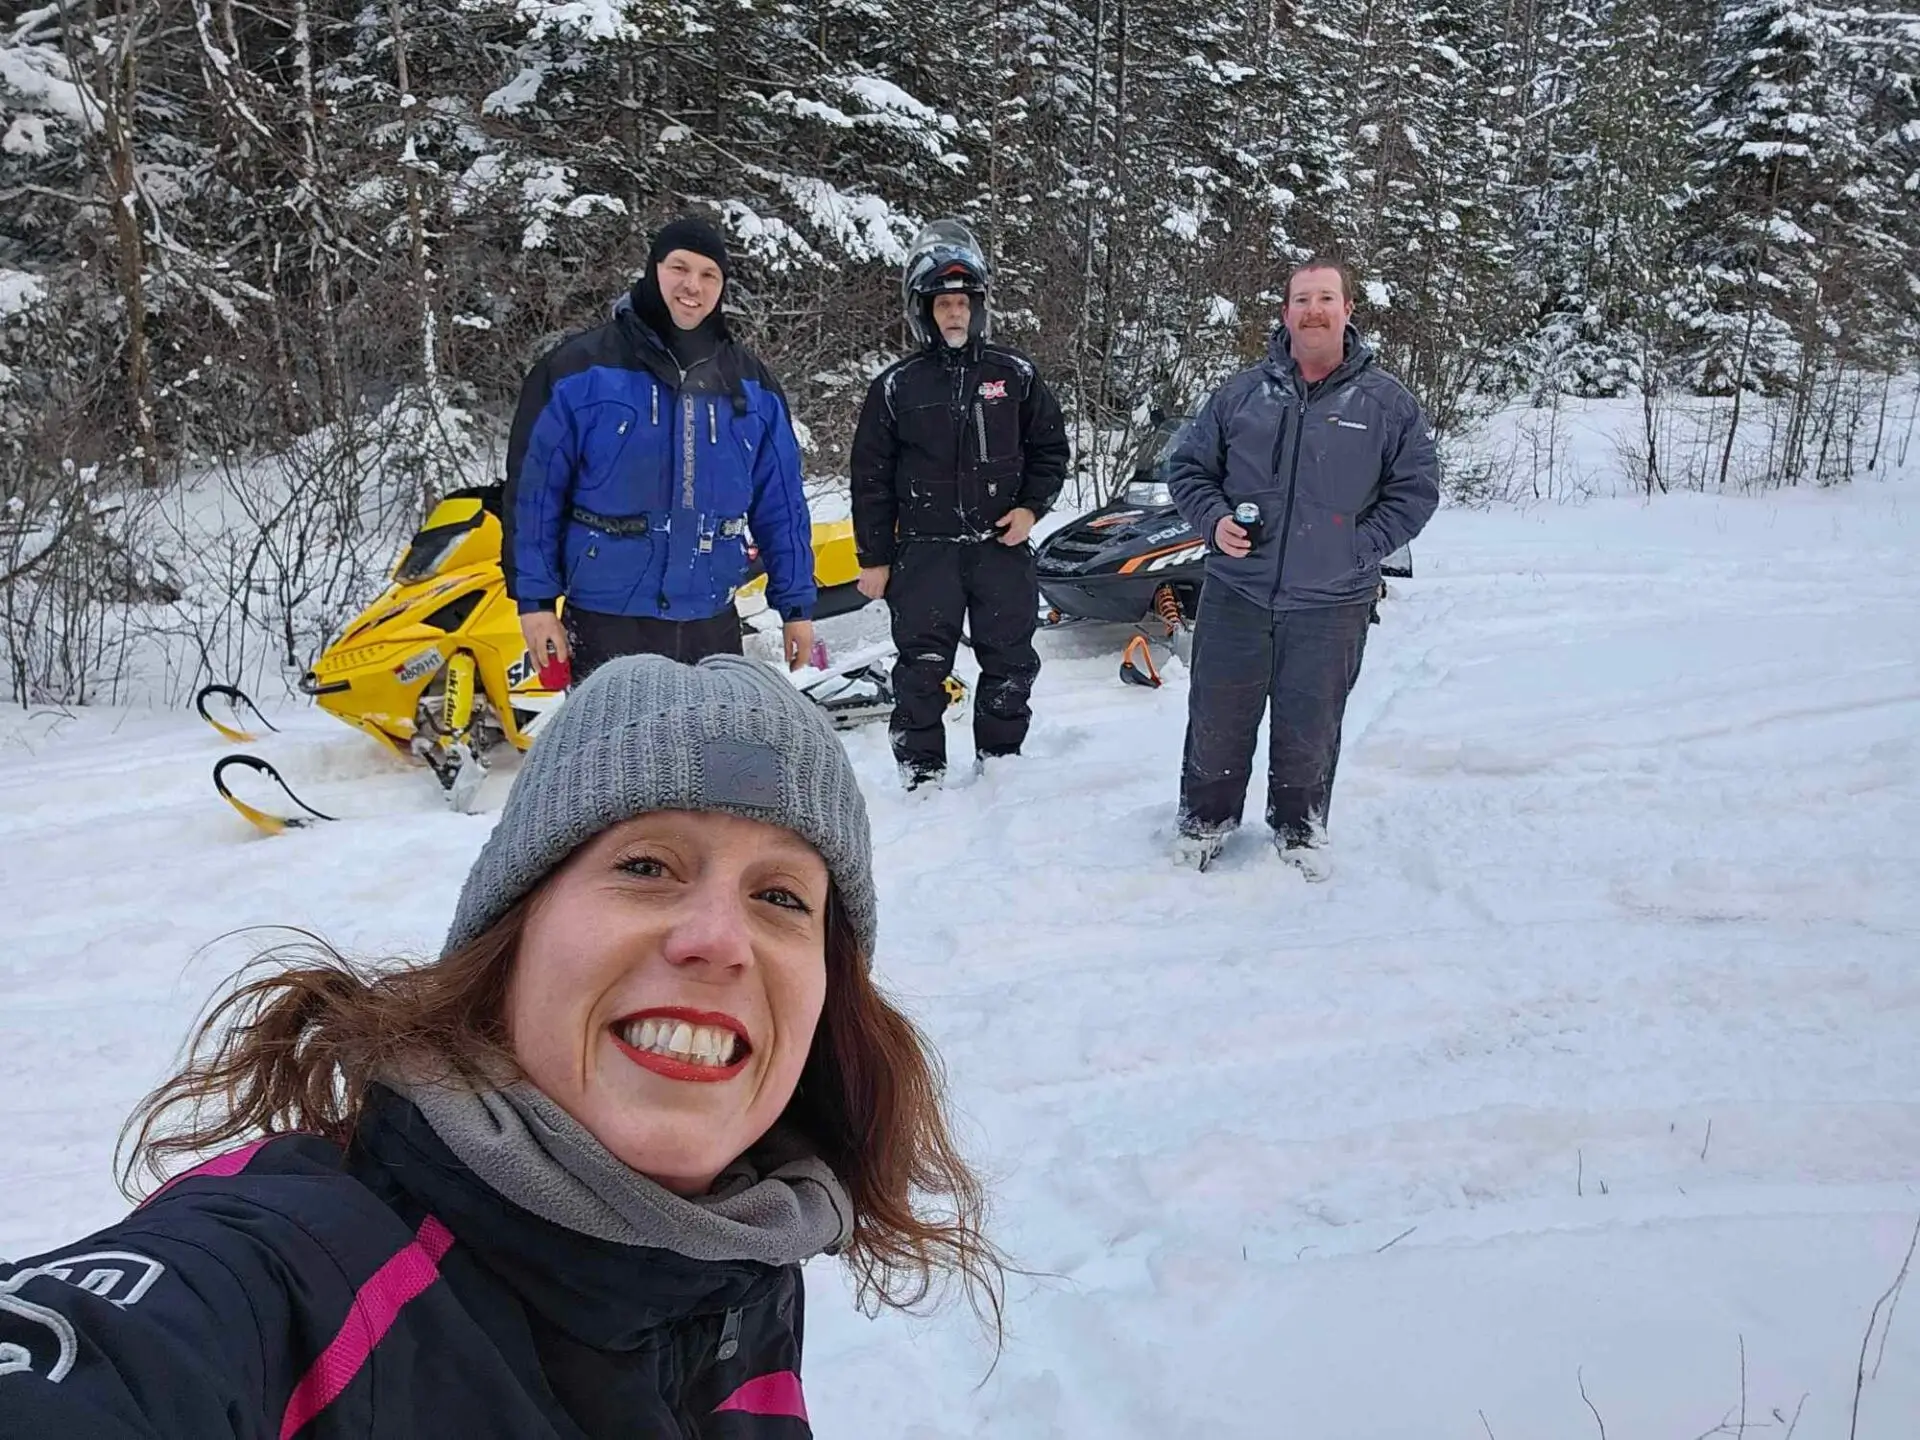 A woman in the foreground takes a selfie with three men standing behind her in a snowy landscape, with snowmobiles visible.